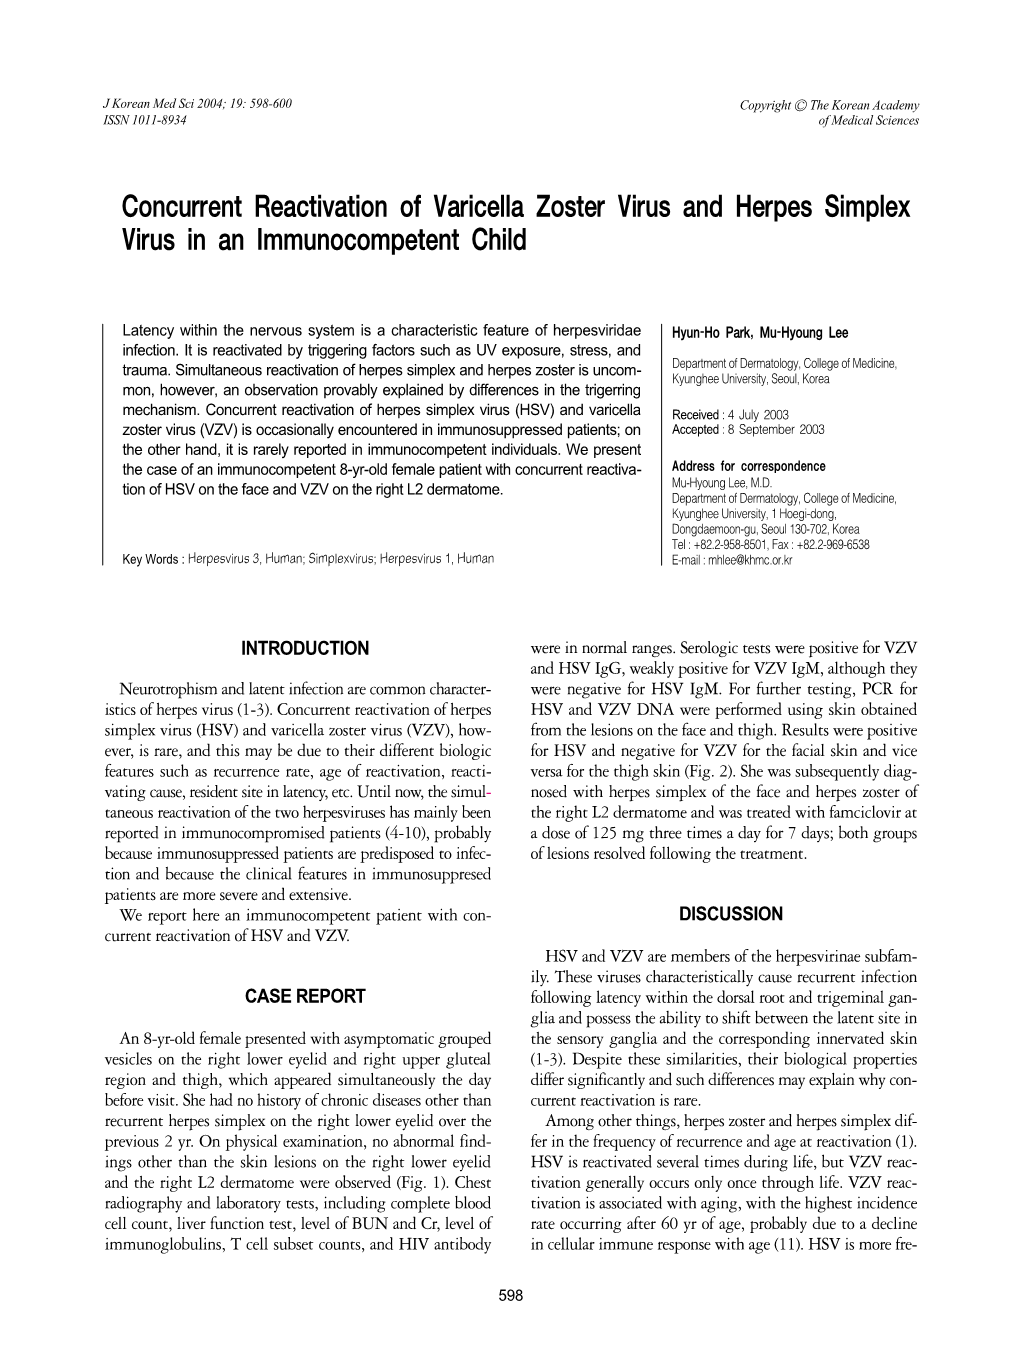 Concurrent Reactivation of Varicella Zoster Virus and Herpes Simplex Virus in an Immunocompetent Child